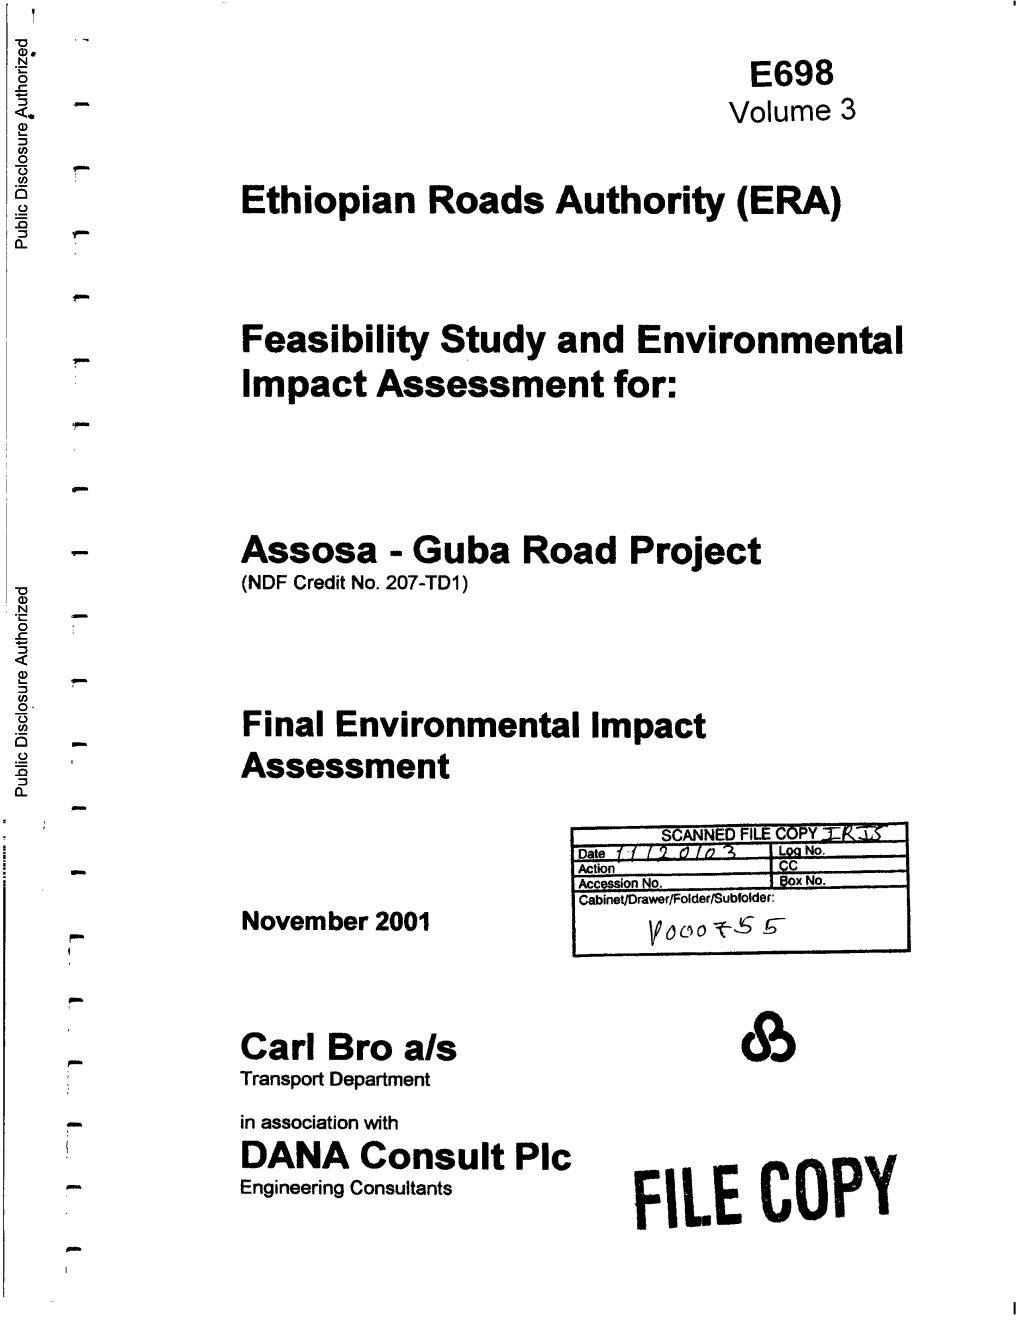 Feasibility Study and Environmental Impact Assessment For: Assosa